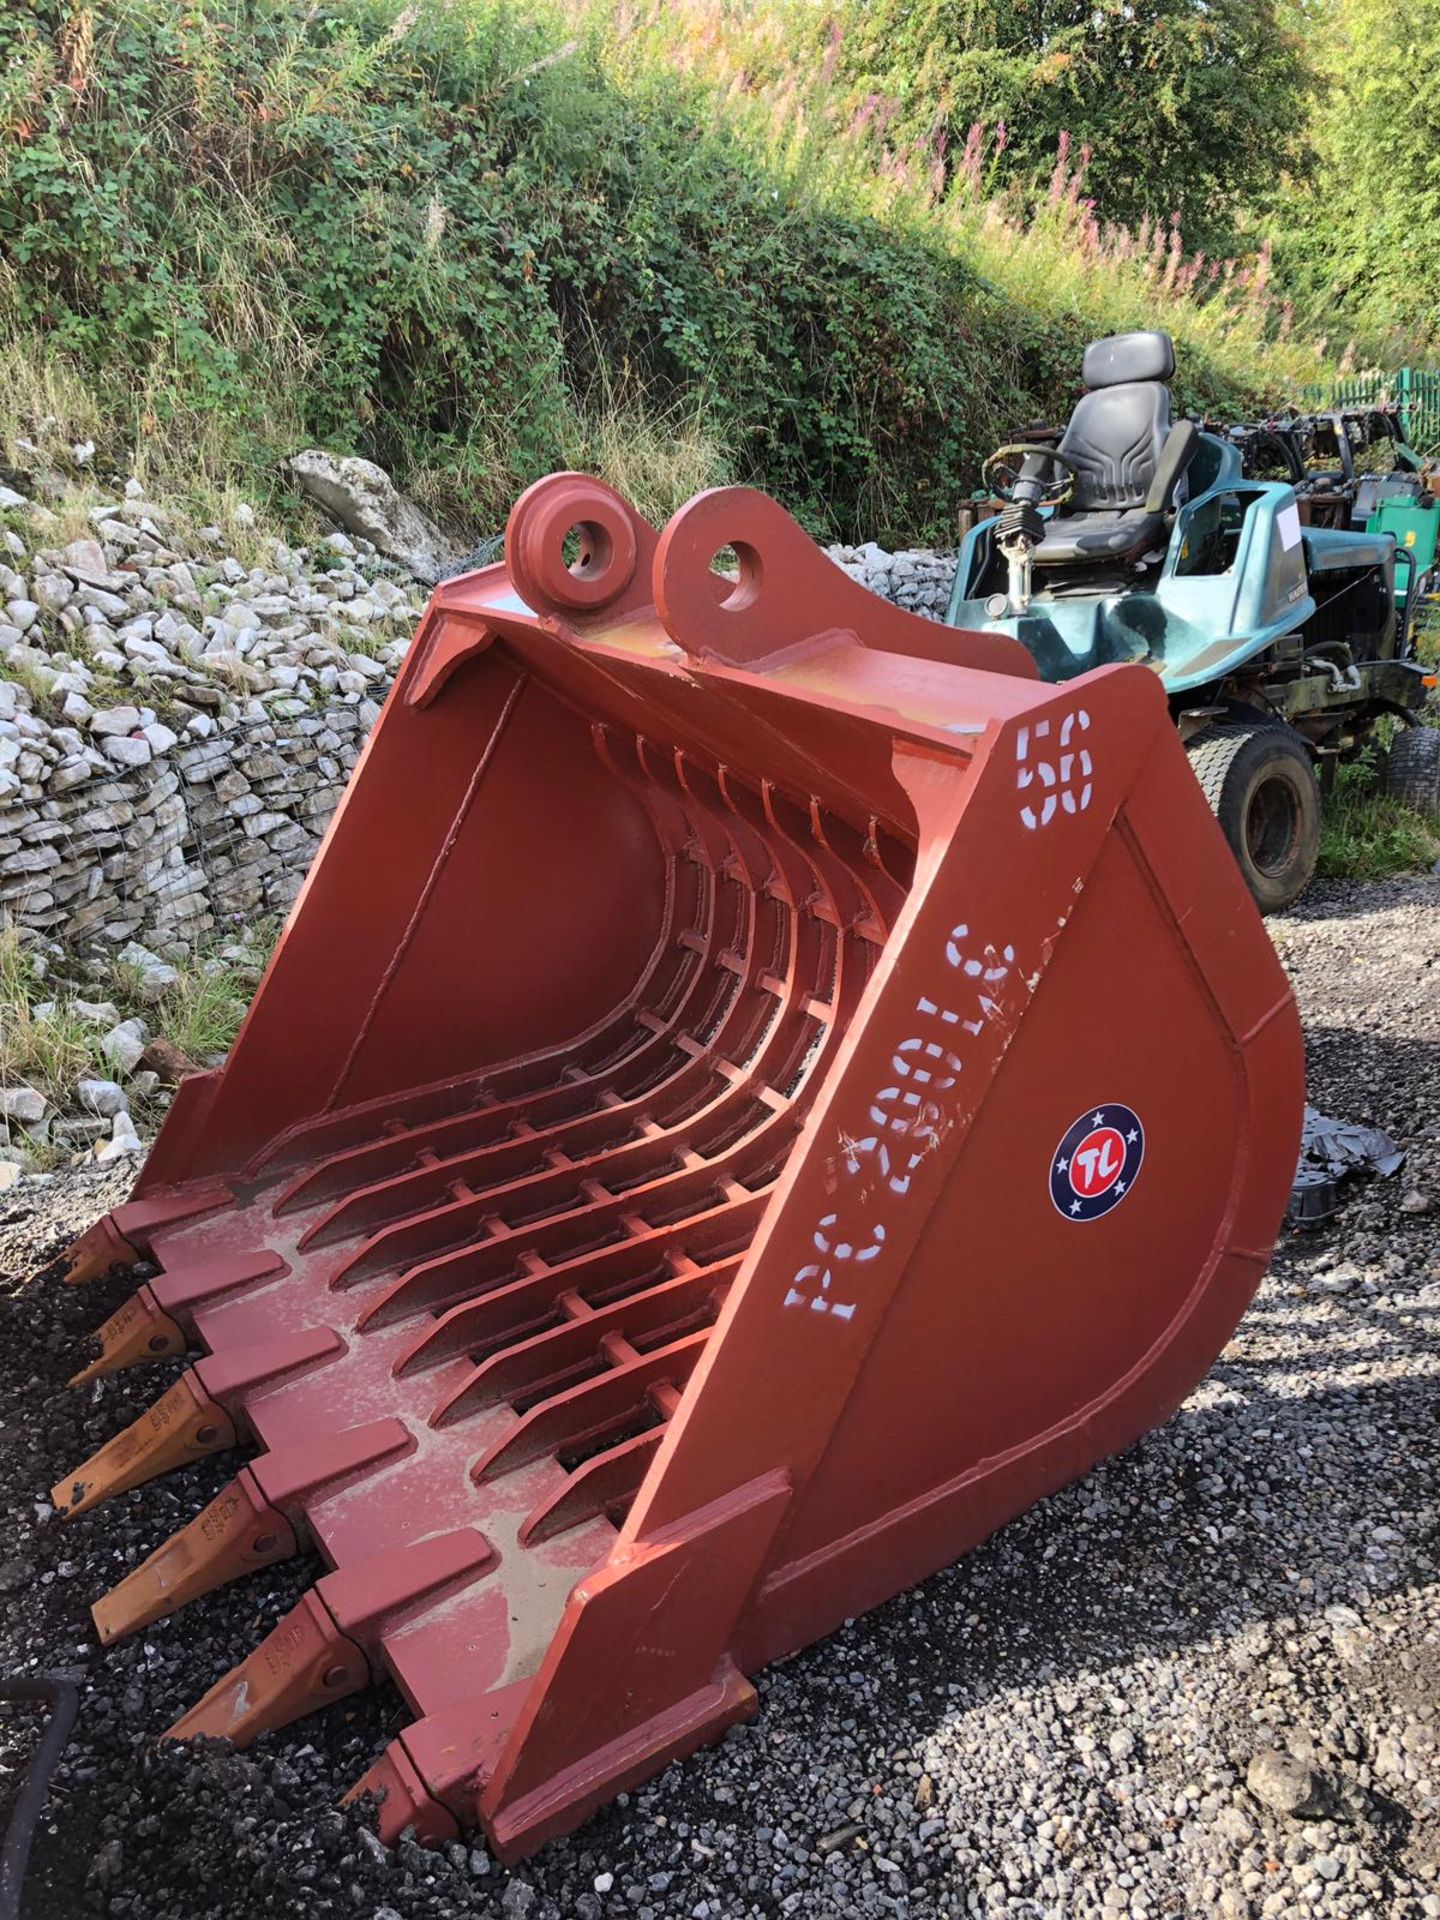 BRAND NEW RIDDLE BUCKET, 80MM PINS, 56 INCH WIDE BUCKET, suit 15-21 TON MACHINES CHOICE *PLUS VAT*